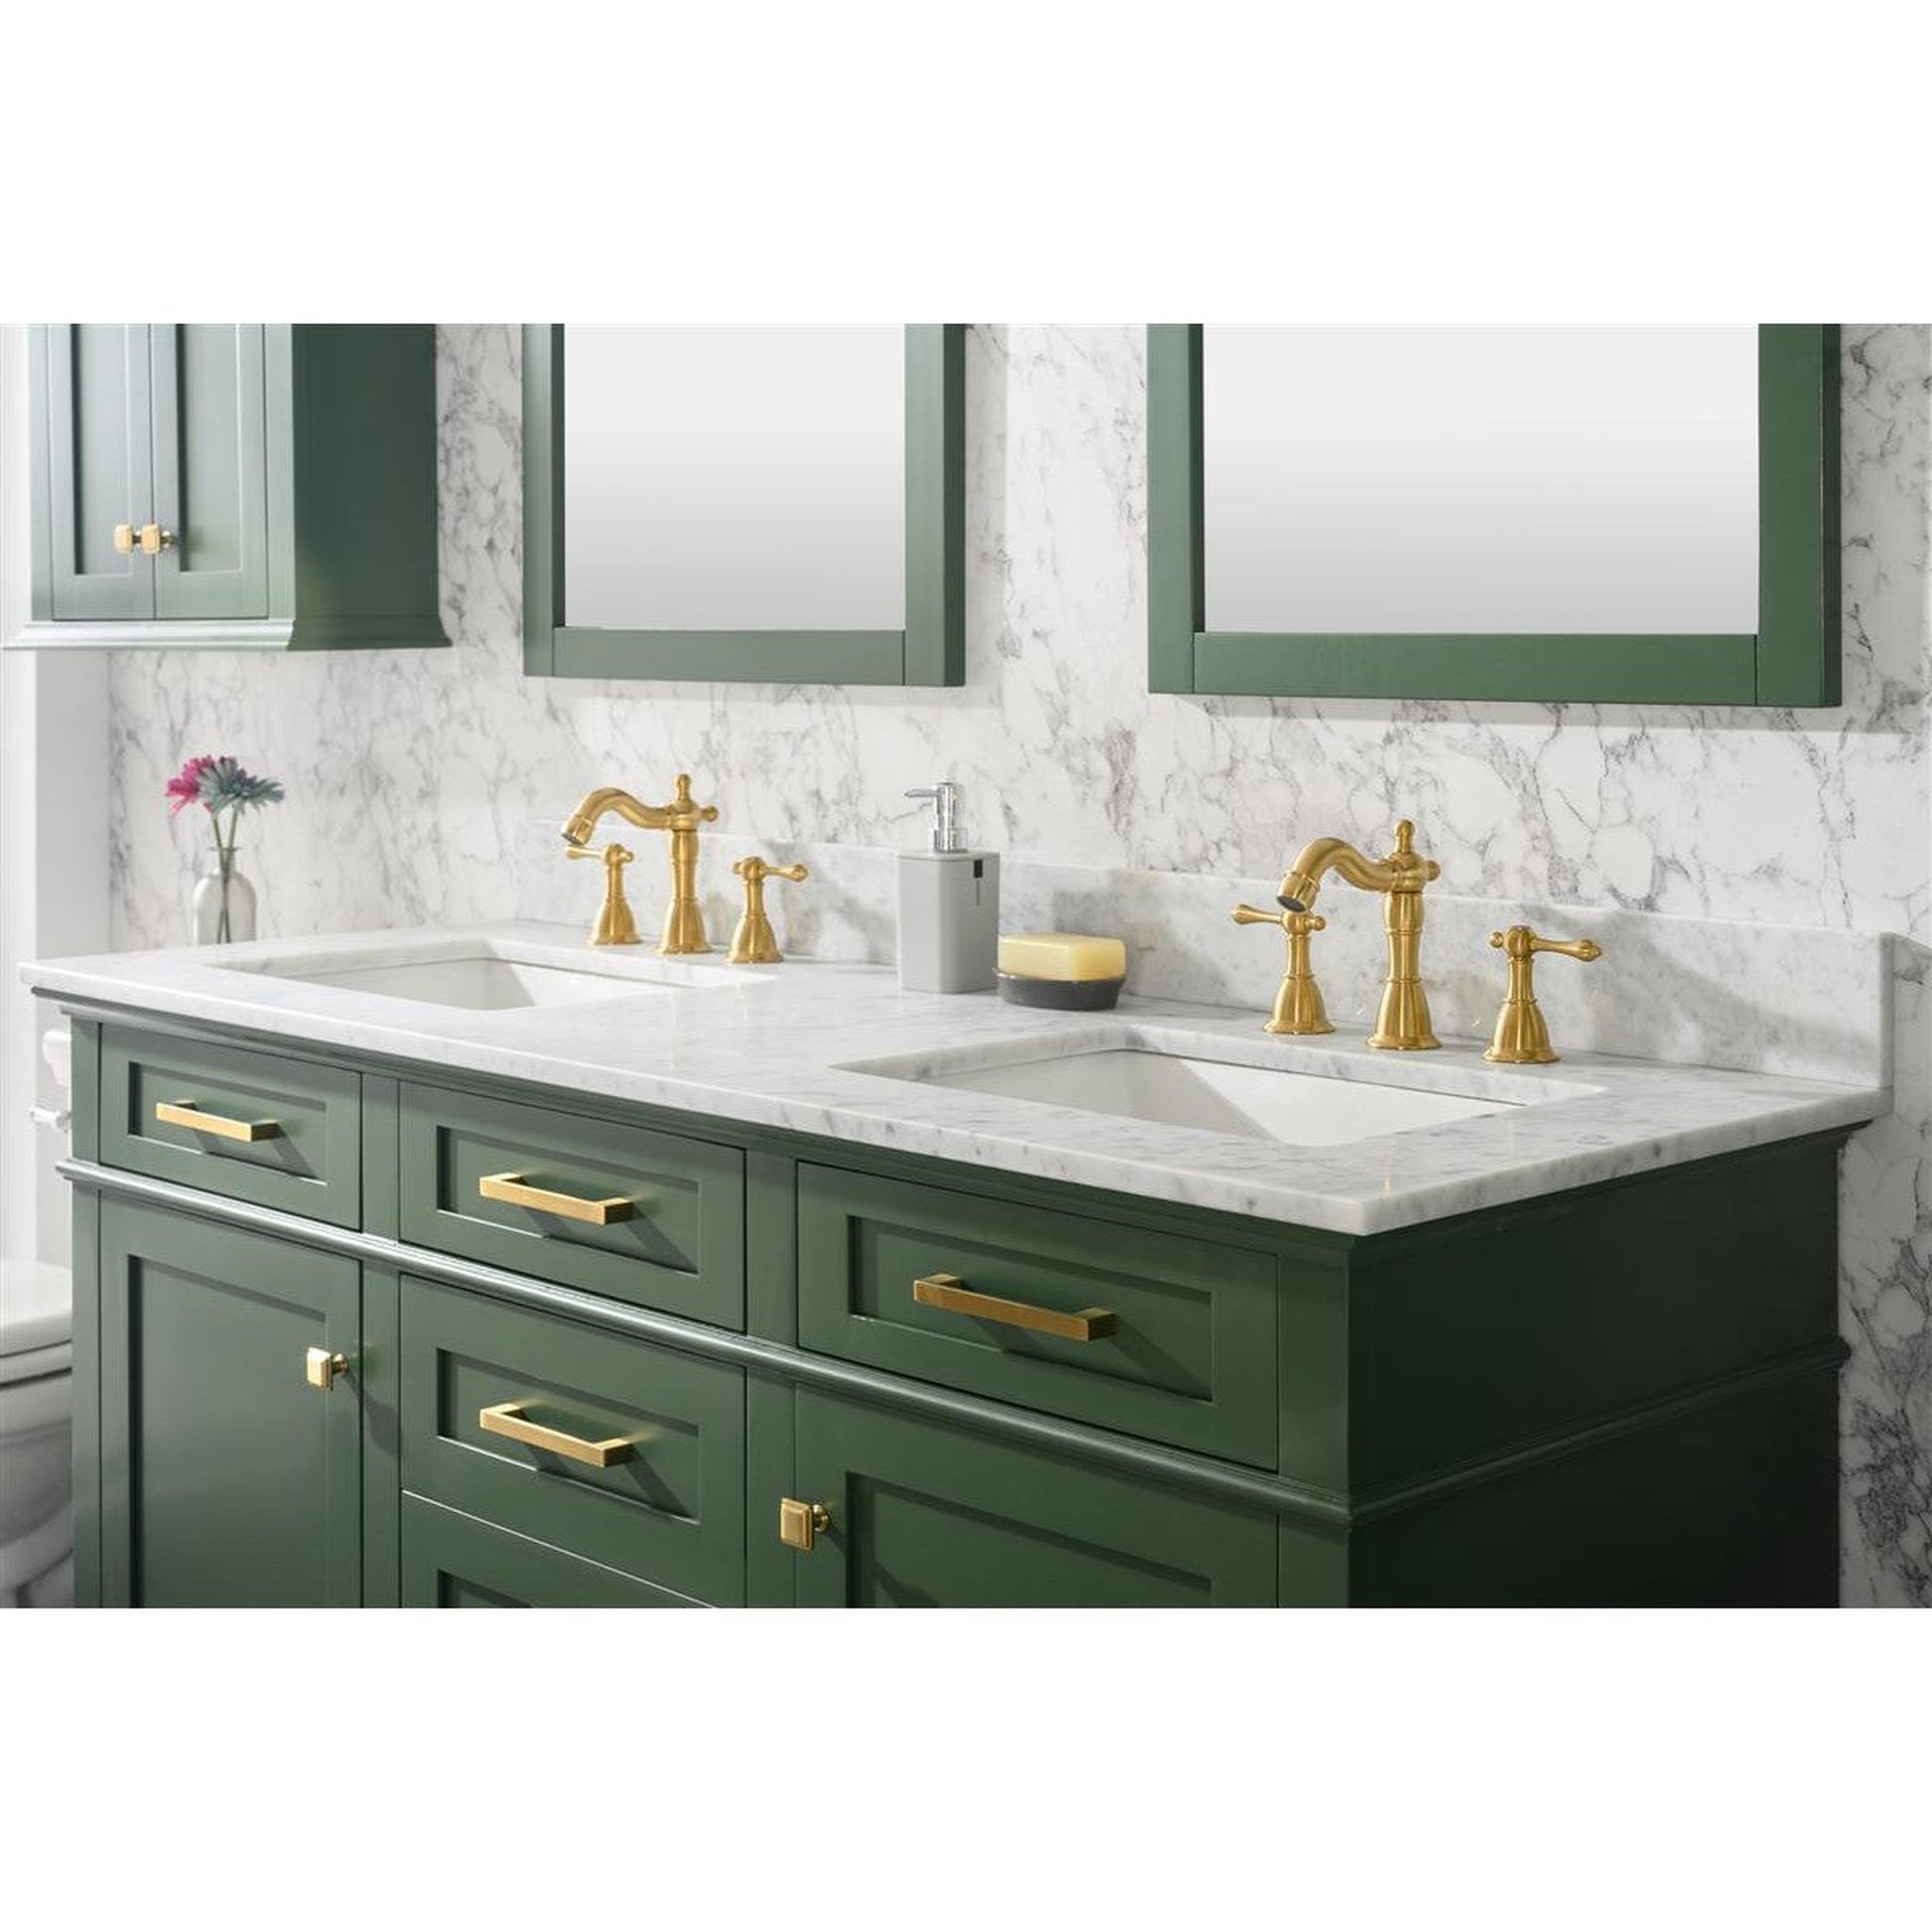 Legion Furniture WLF2260D 60" Vogue Green Freestanding Vanity With White Carrara Marble Top and Double White Ceramic Sink